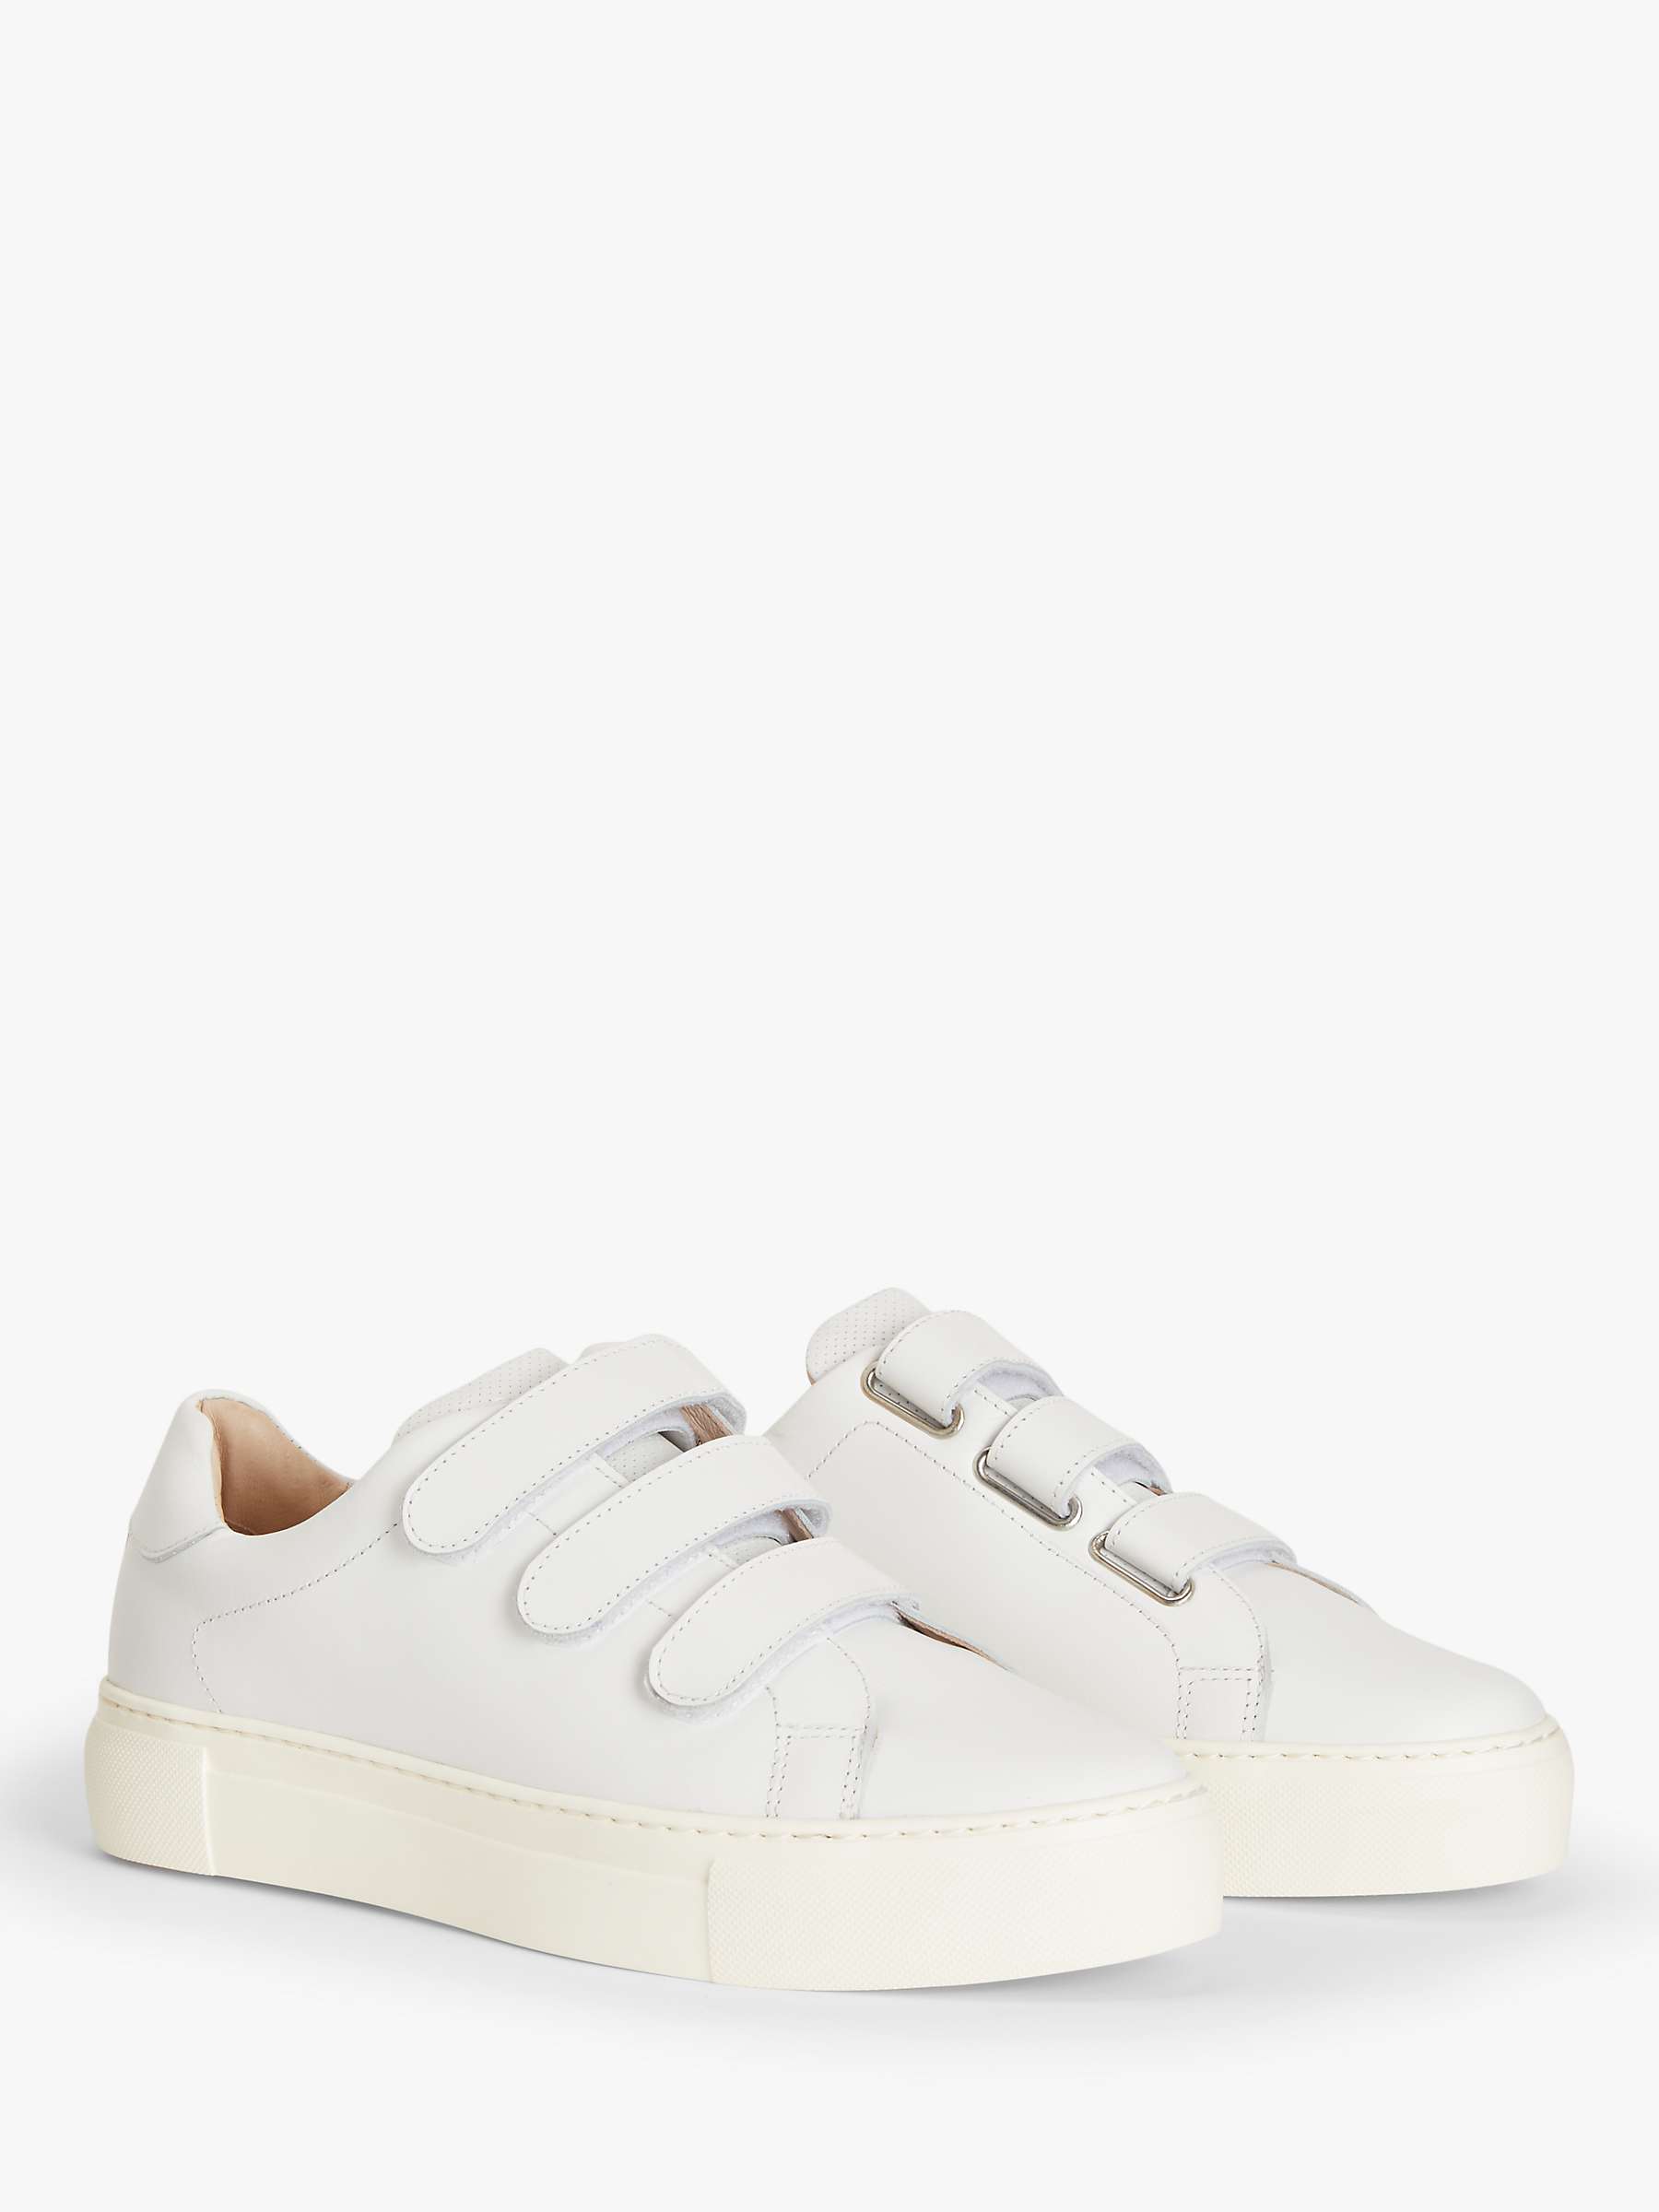 Buy John Lewis Fawne Ripstop Trainers Online at johnlewis.com